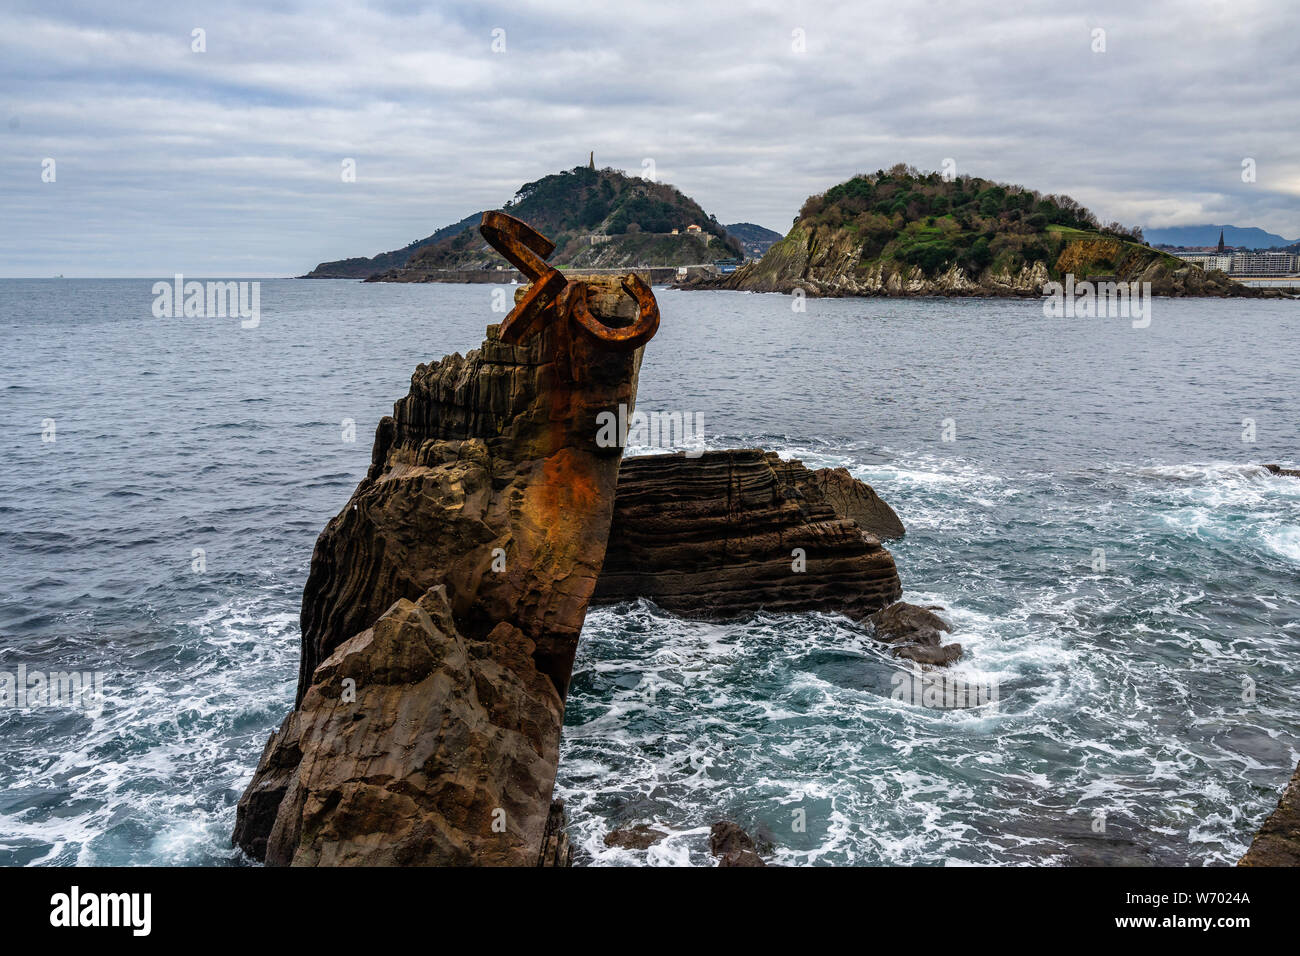 Peine del Viento sculpture on a rock with La Concha bay in the background, San Sebastian, Basque Country, Spain Stock Photo